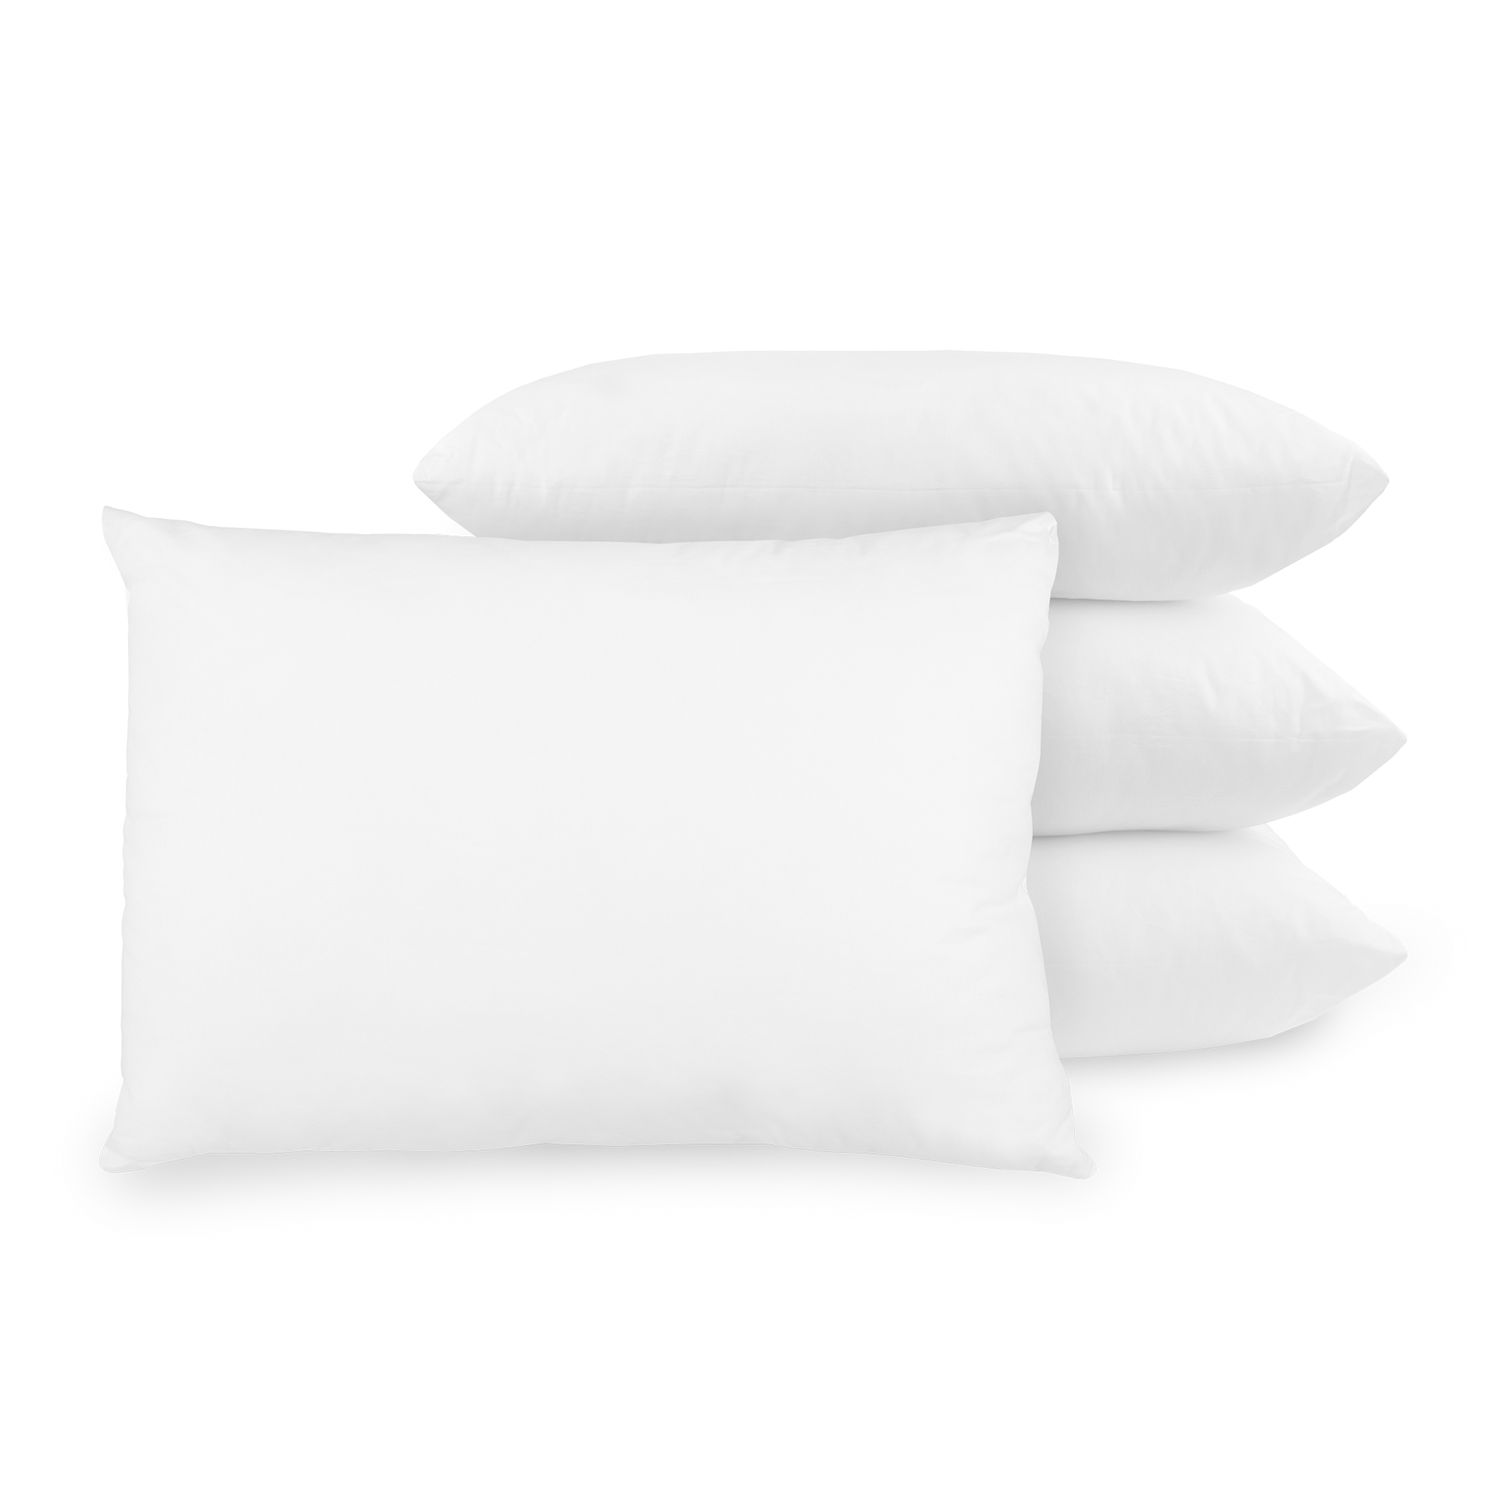 sealy luxury down adaptive pillow